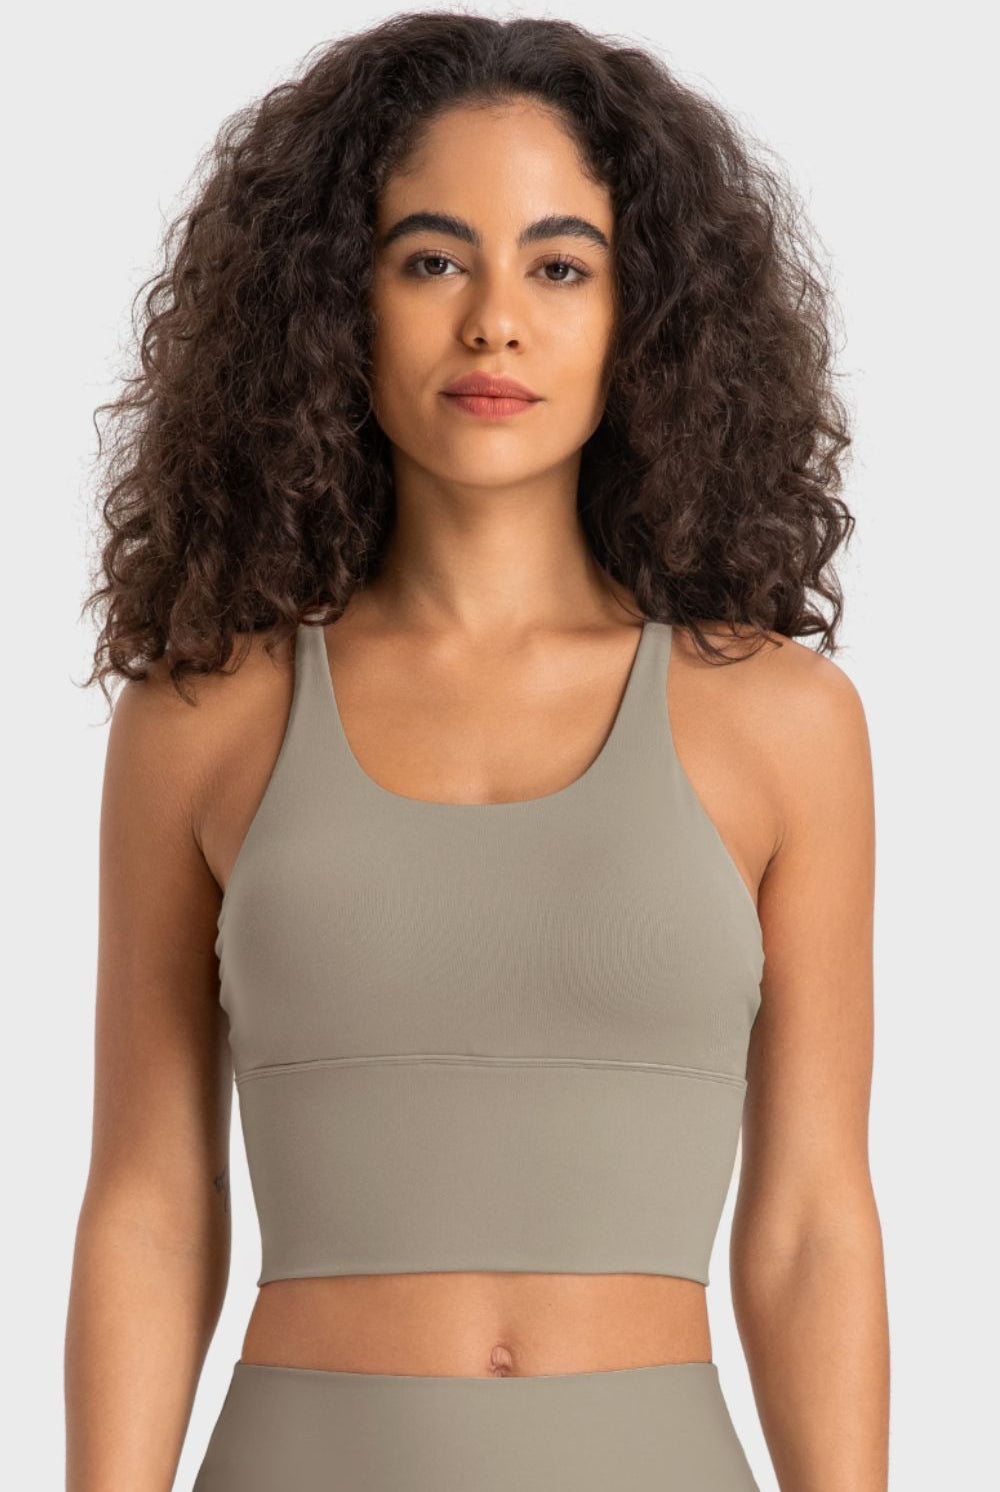 Rosy Brown Sugar and Spice Crisscross Back Ladder Detail Sports Bra activewear